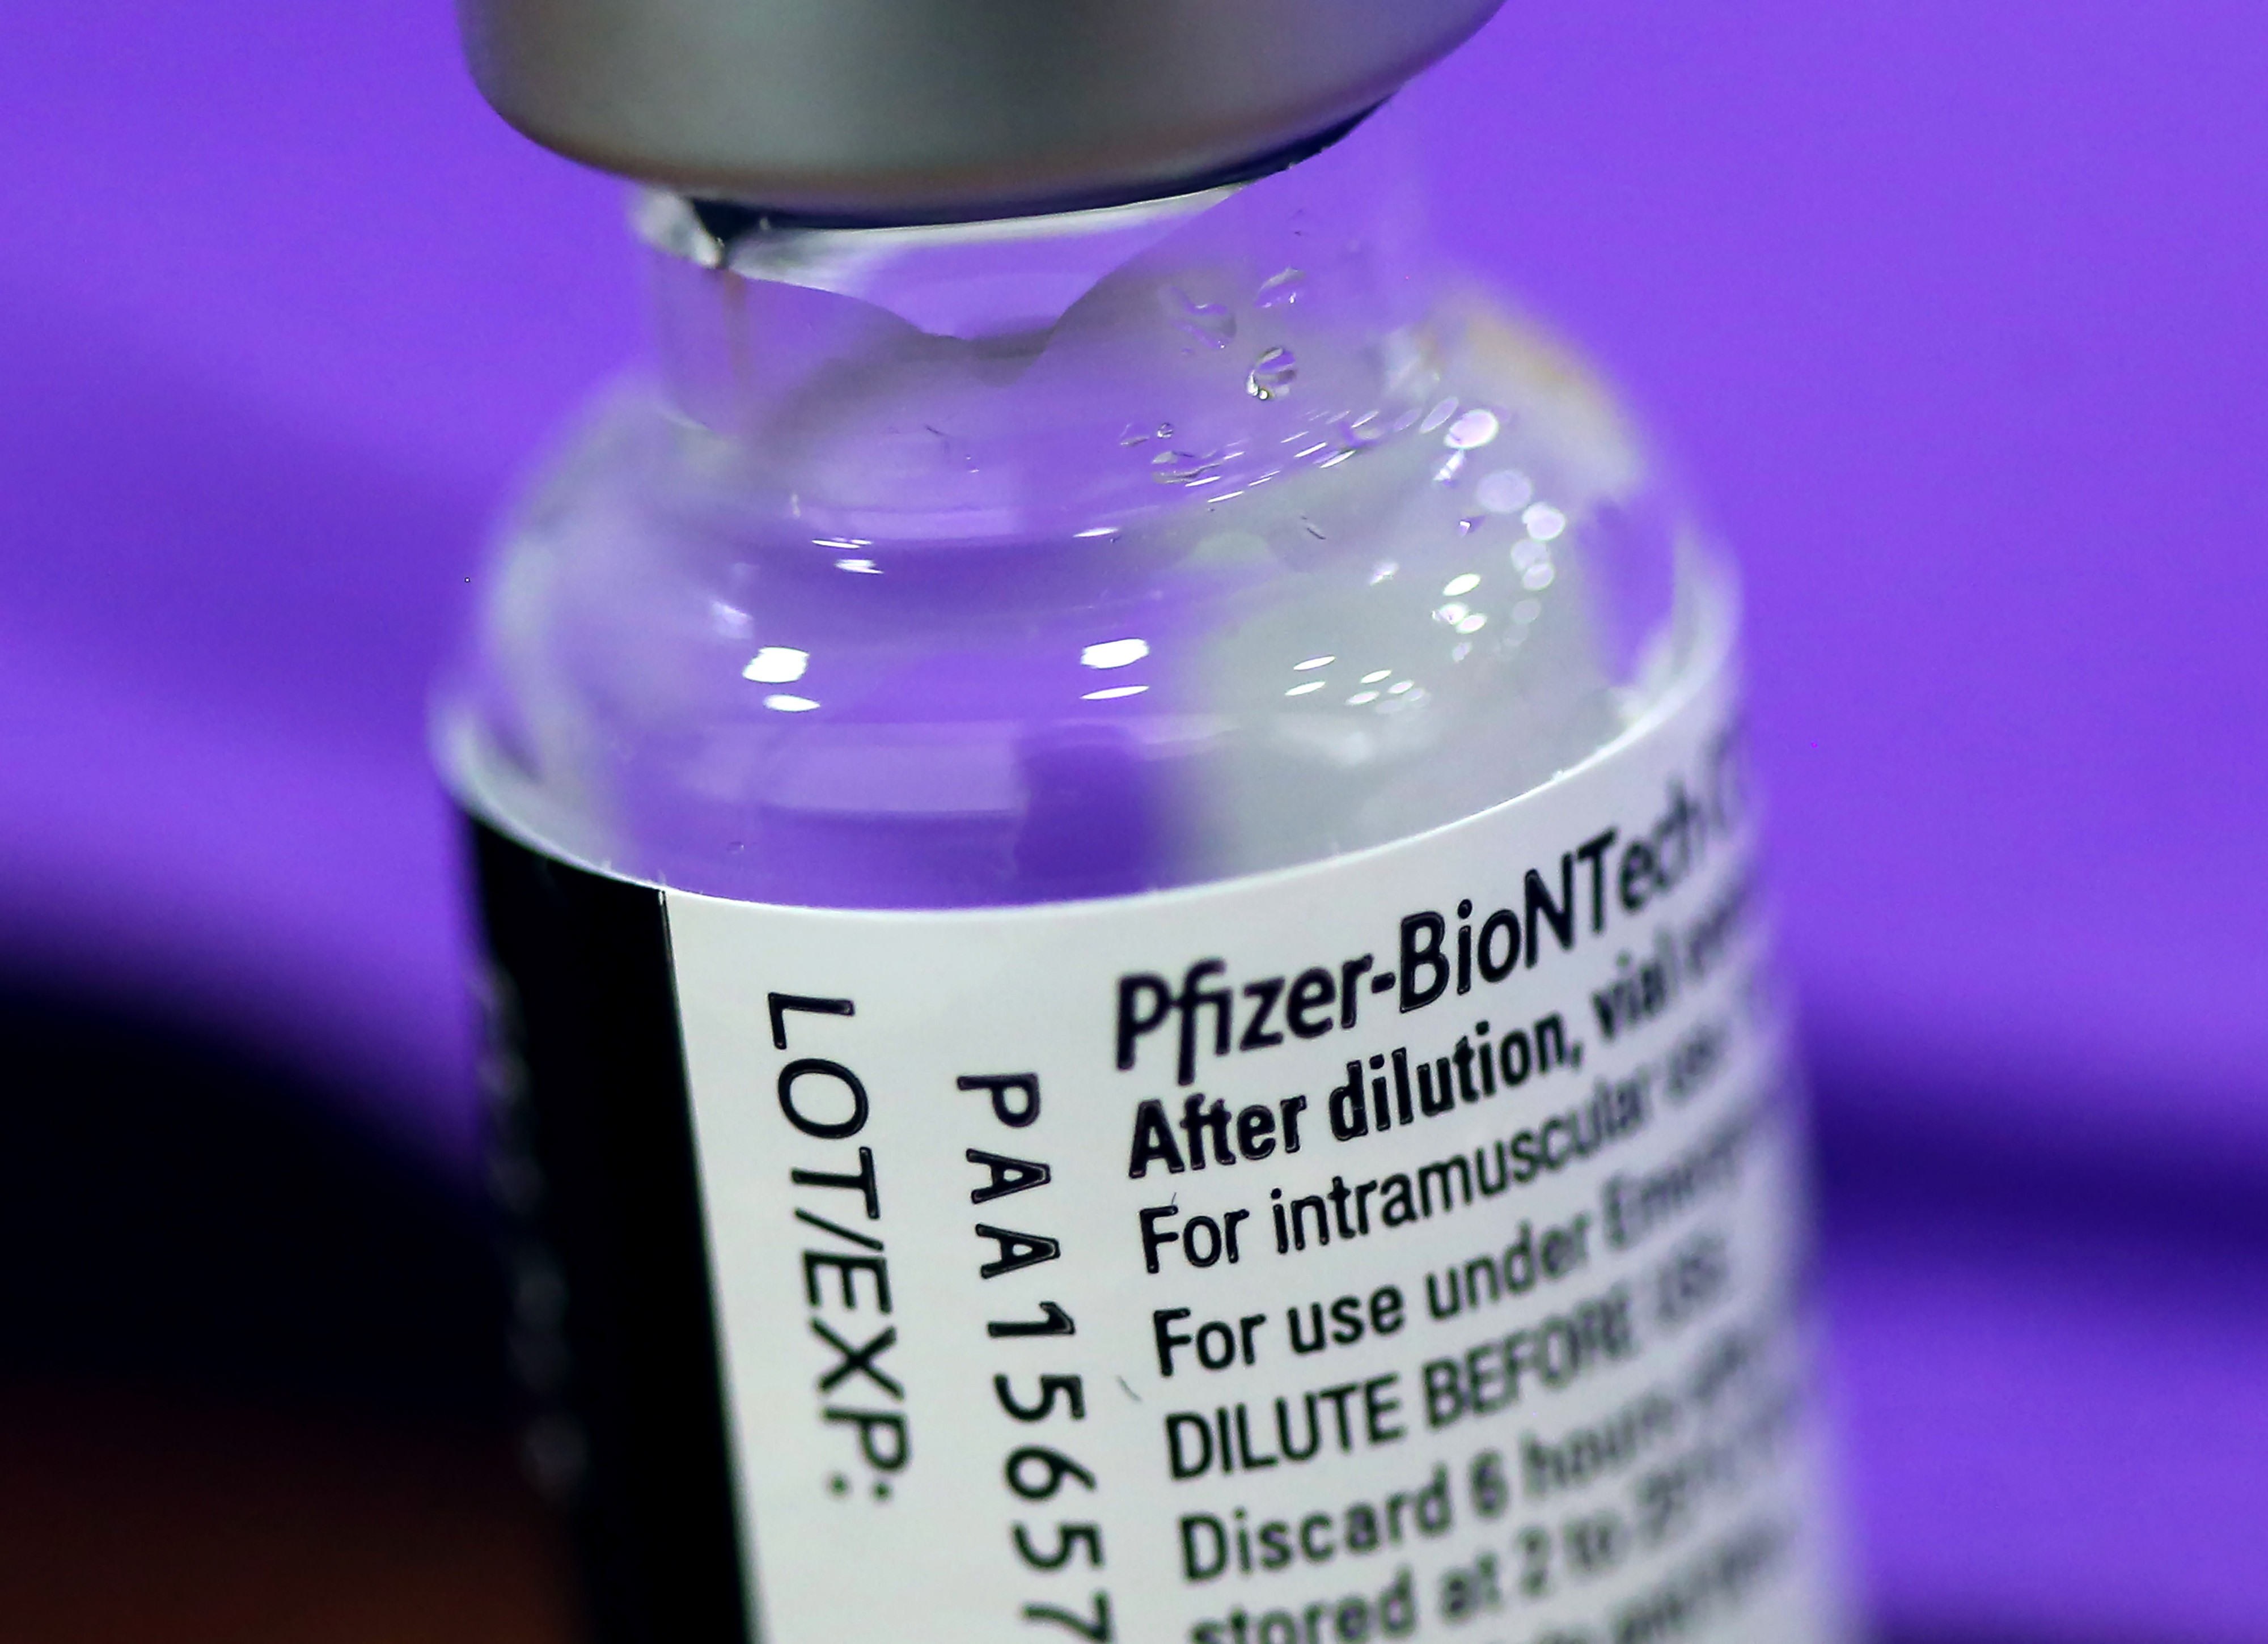 Philippines Approves Pfizer Covid Vaccine for Emergency Use - Bloomberg